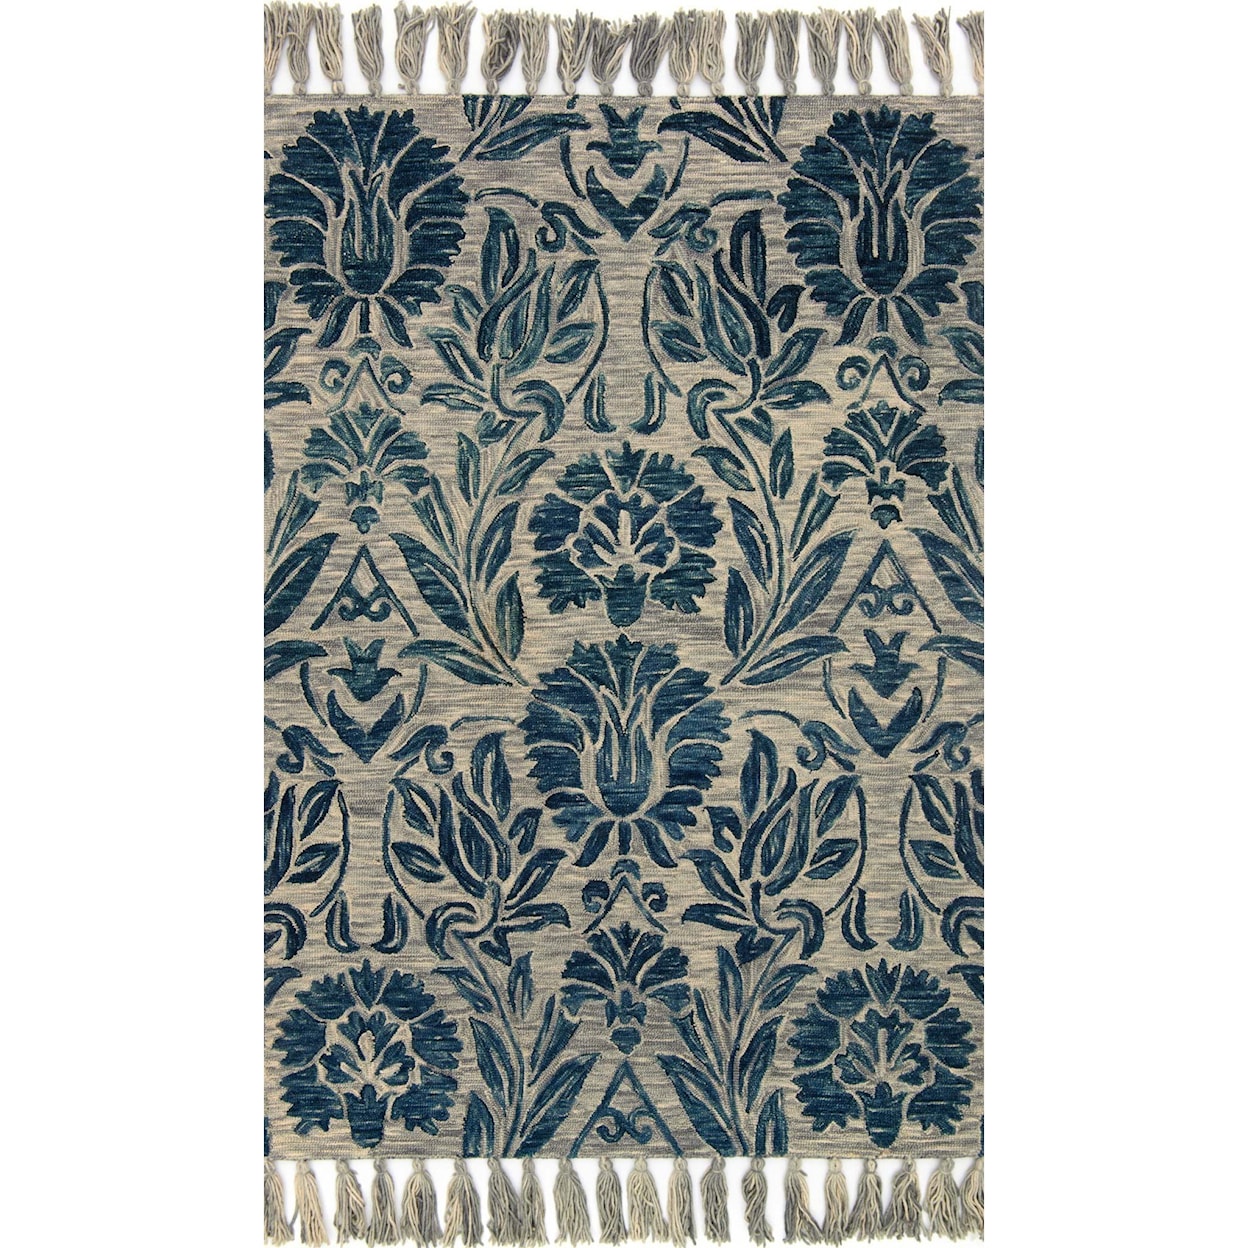 Magnolia Home by Joanna Gaines for Loloi Jozie Day 9' 3" X 13' Rectangle Rug